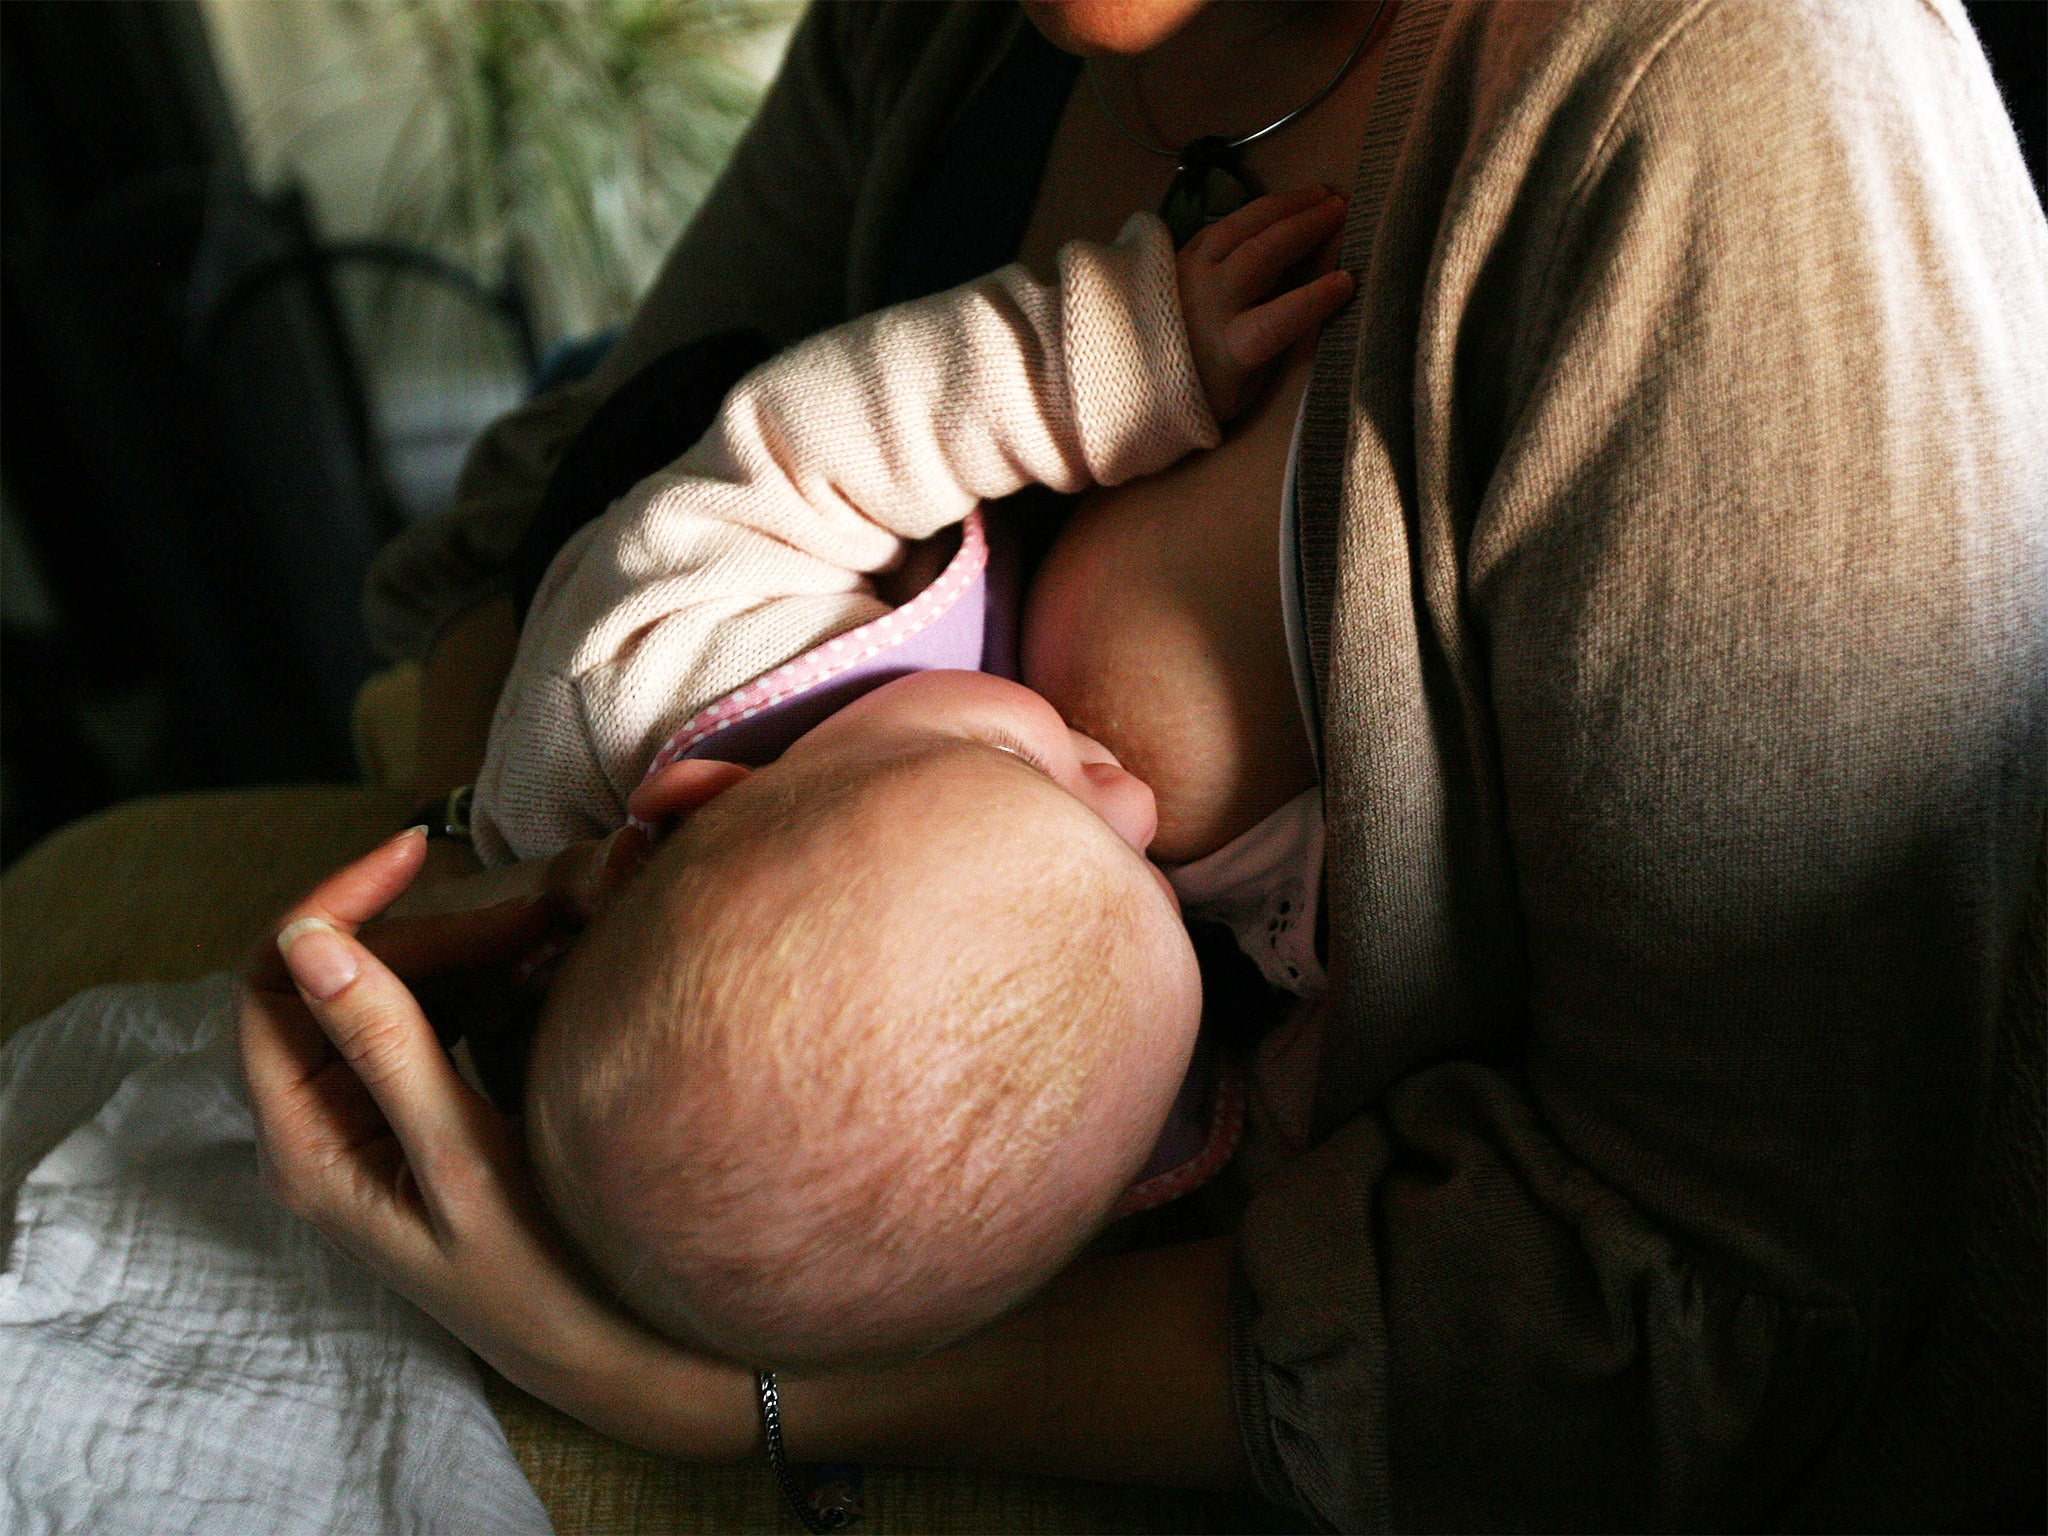 Sharing breast milk online: The next big thing?, The Independent